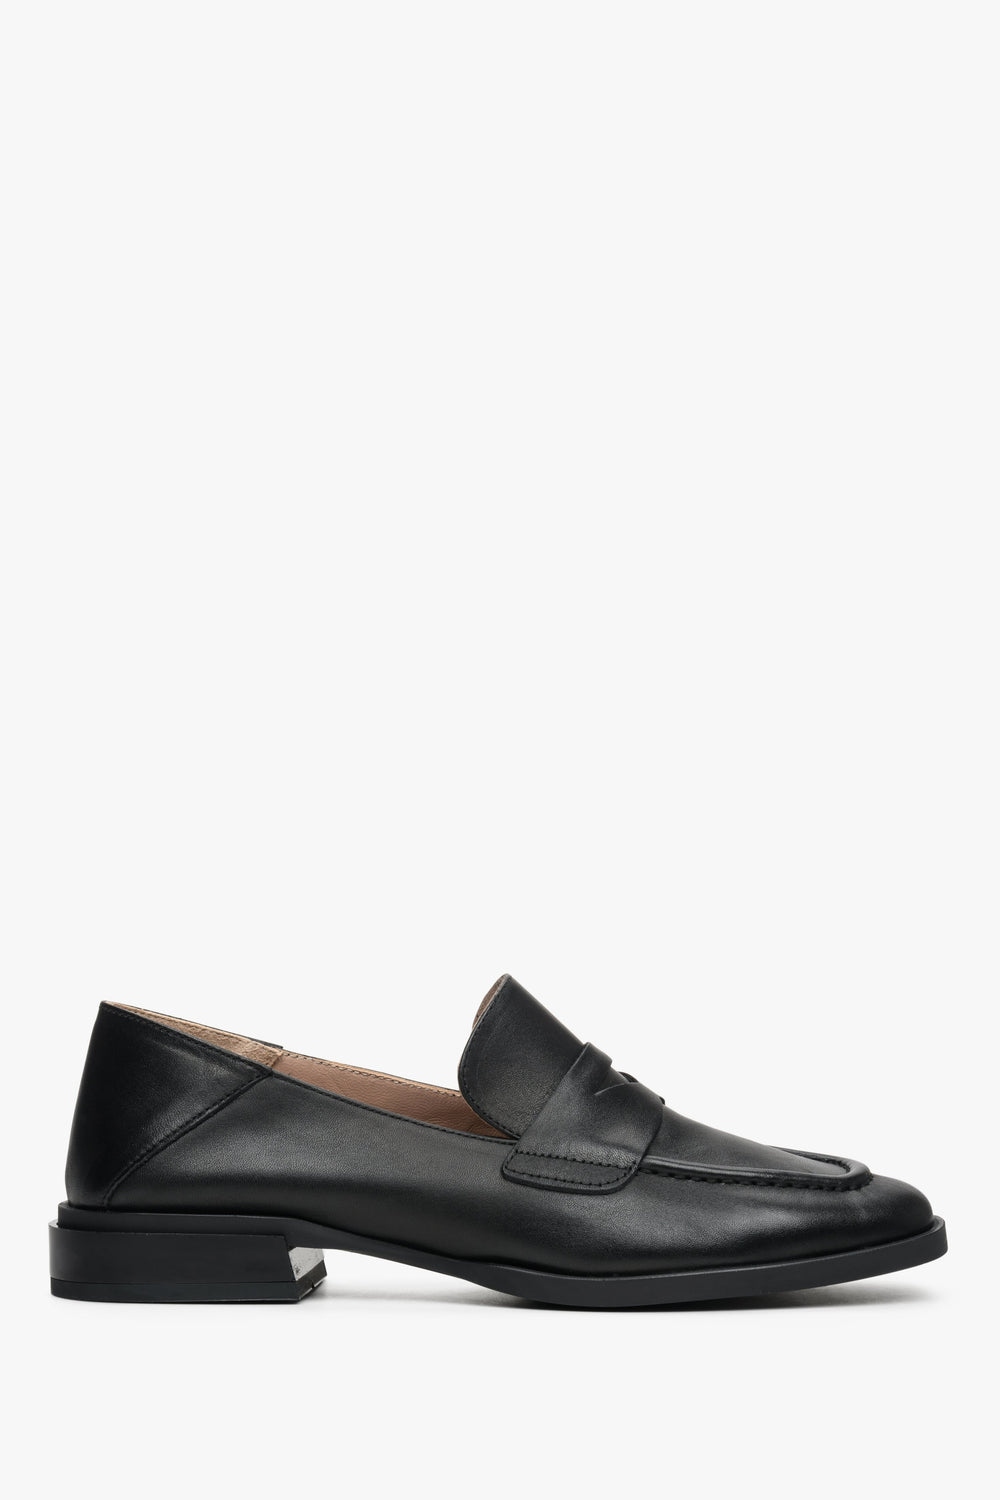 Women's Black Leather Loafers with a Low Heel Estro ER00112824.